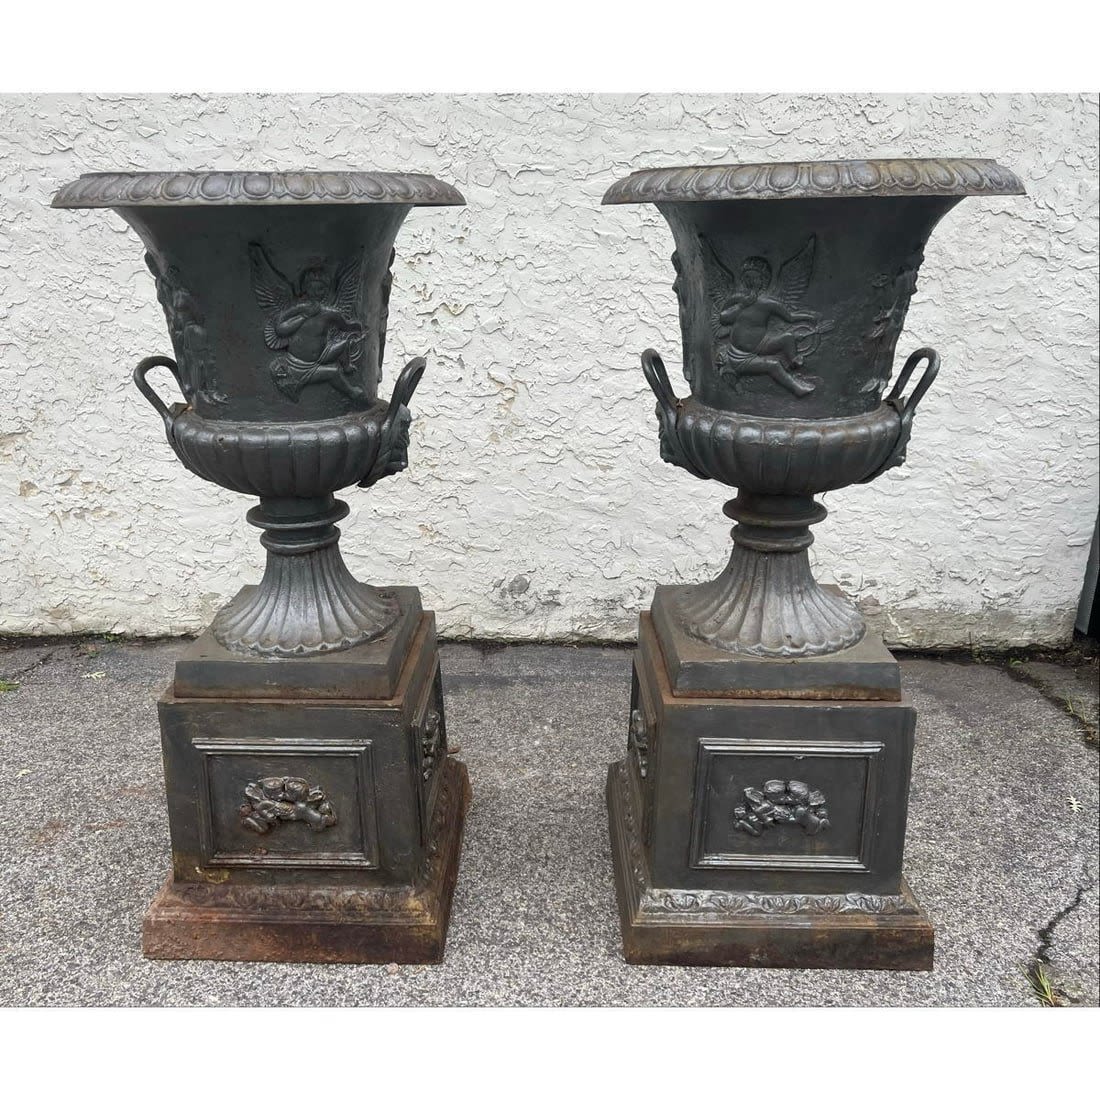 Pr Classical form Urn style Iron